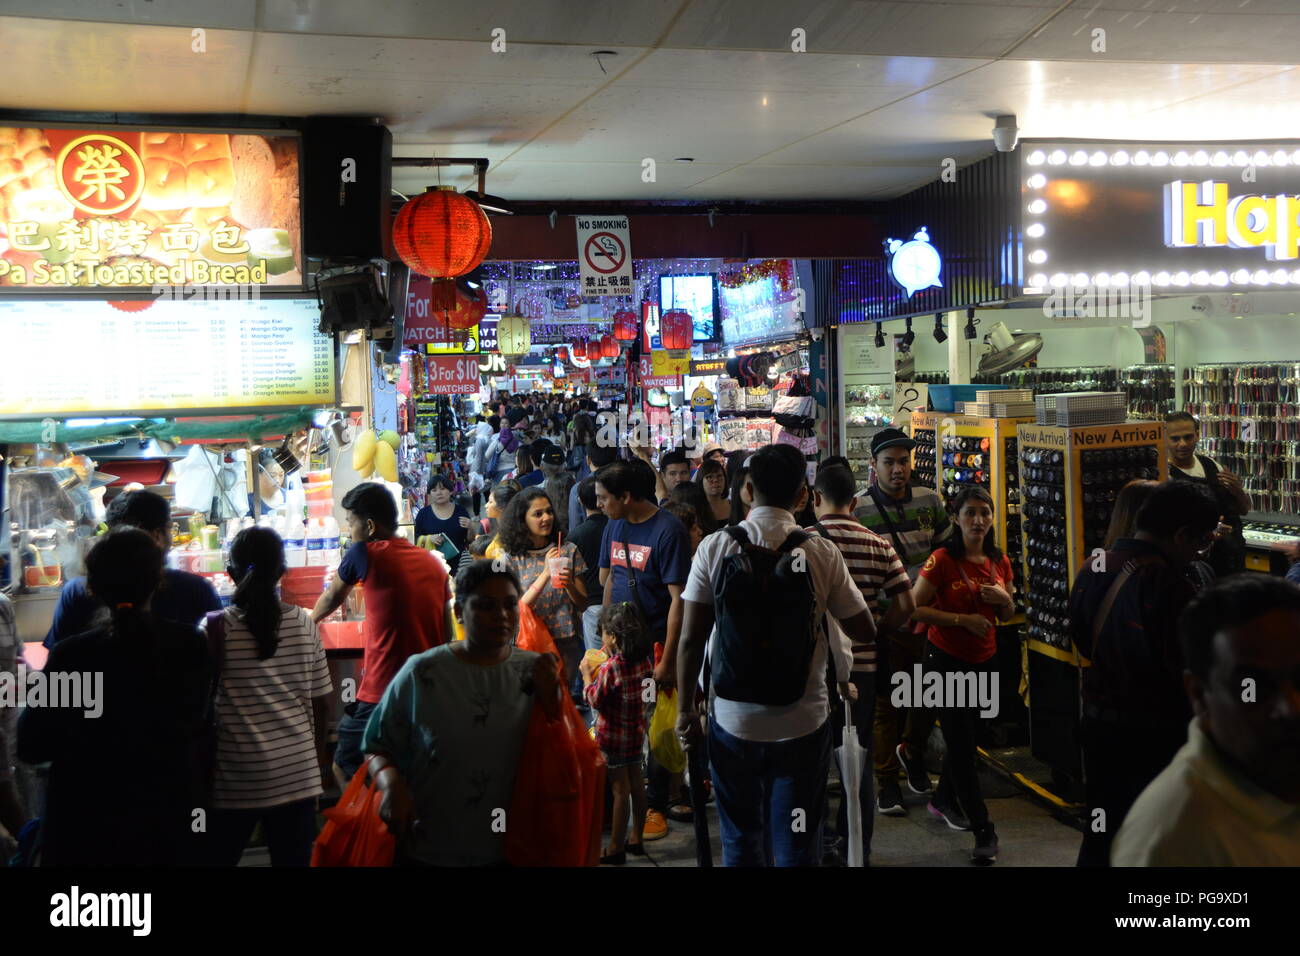 Crowds wander at night near the entrance to this market. Popular with both locals and tourists, Bugis Street Market is well-known for being one of the cheapest places in Singapore to buy souvenirs, accessories, clothes, electronics, houseware and cosmetics. Stock Photo